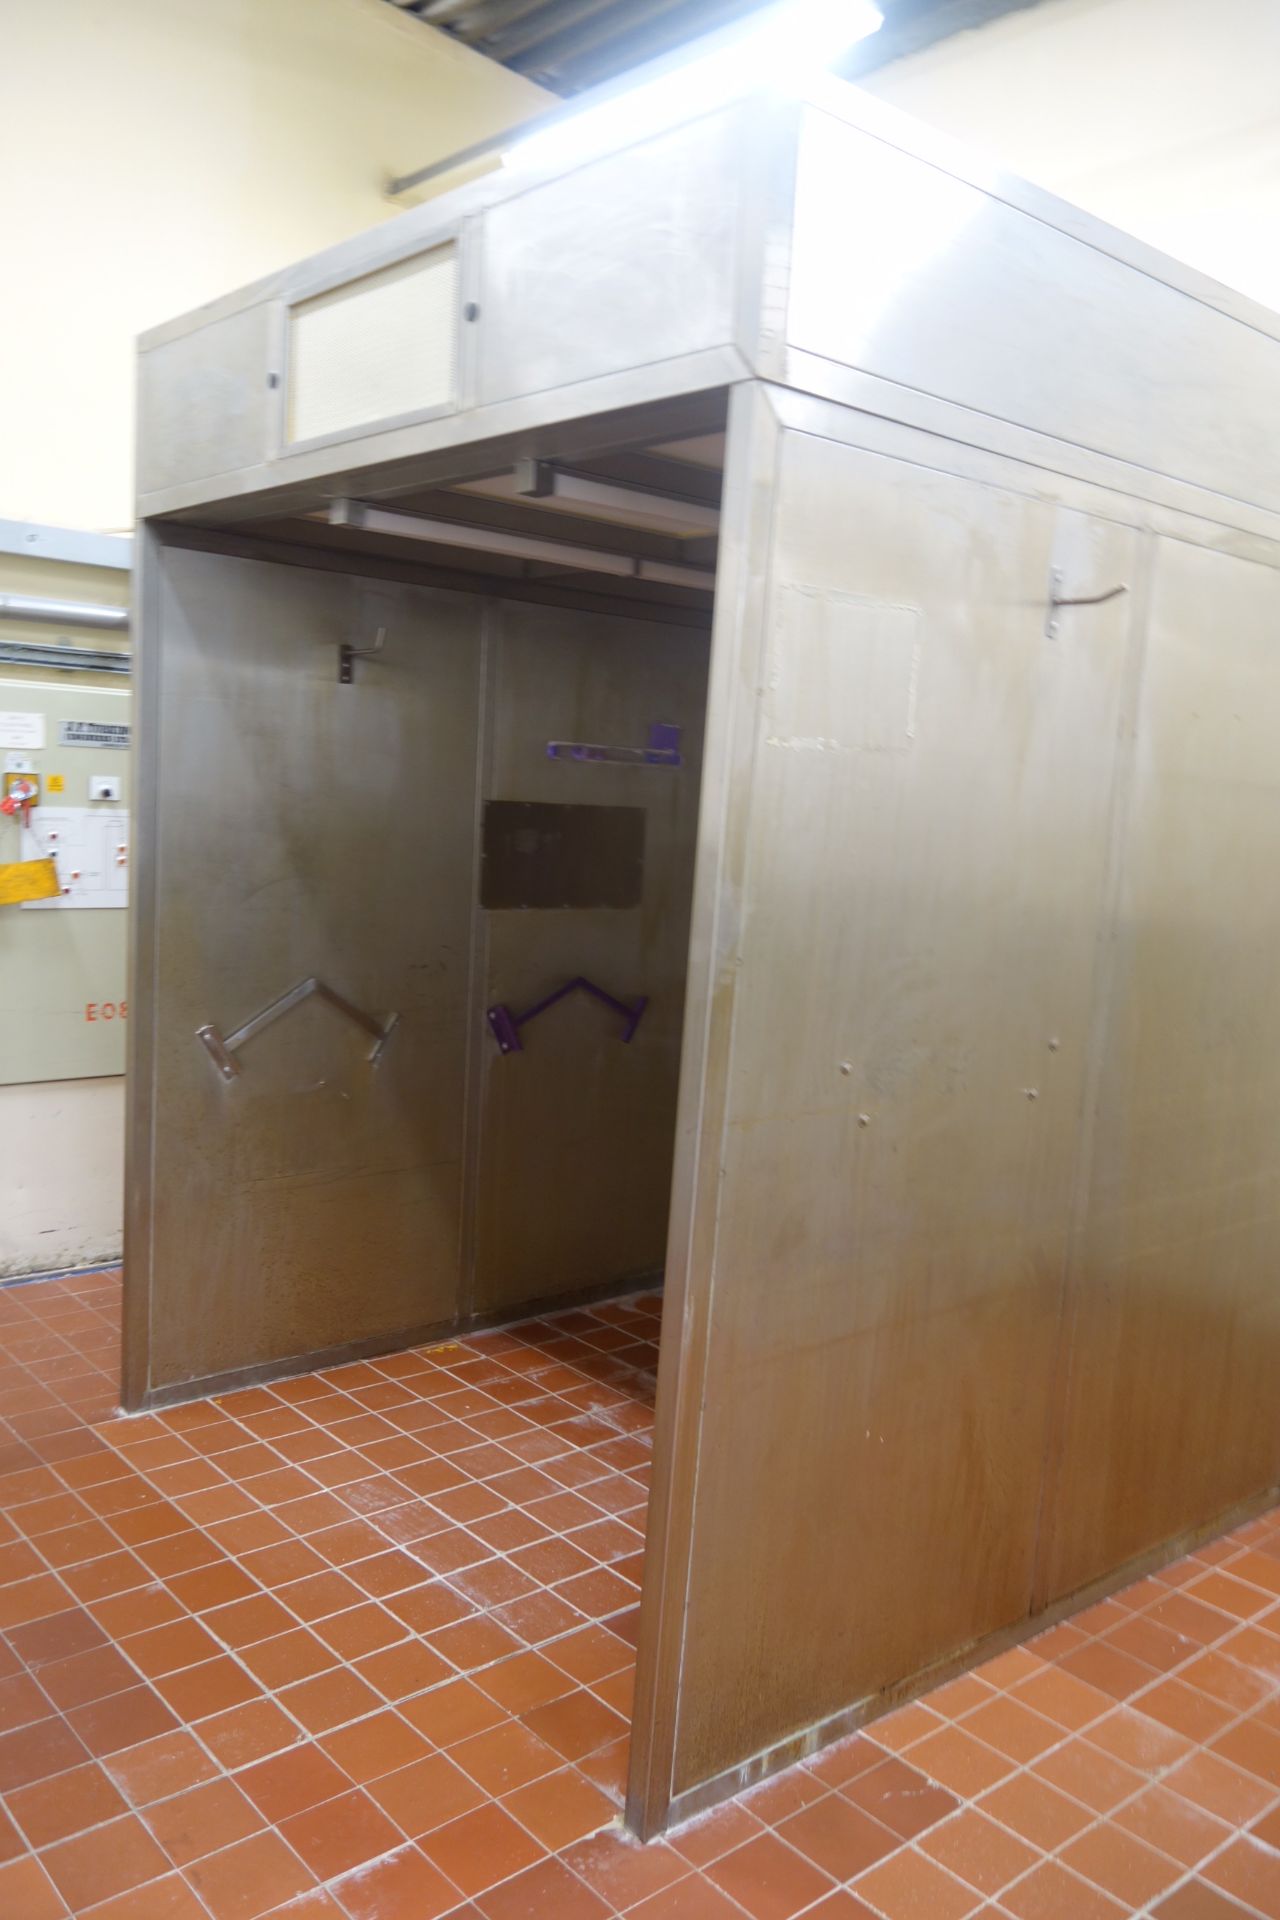 Dust Extraction Booth, internal dims 2m wide x 1.9